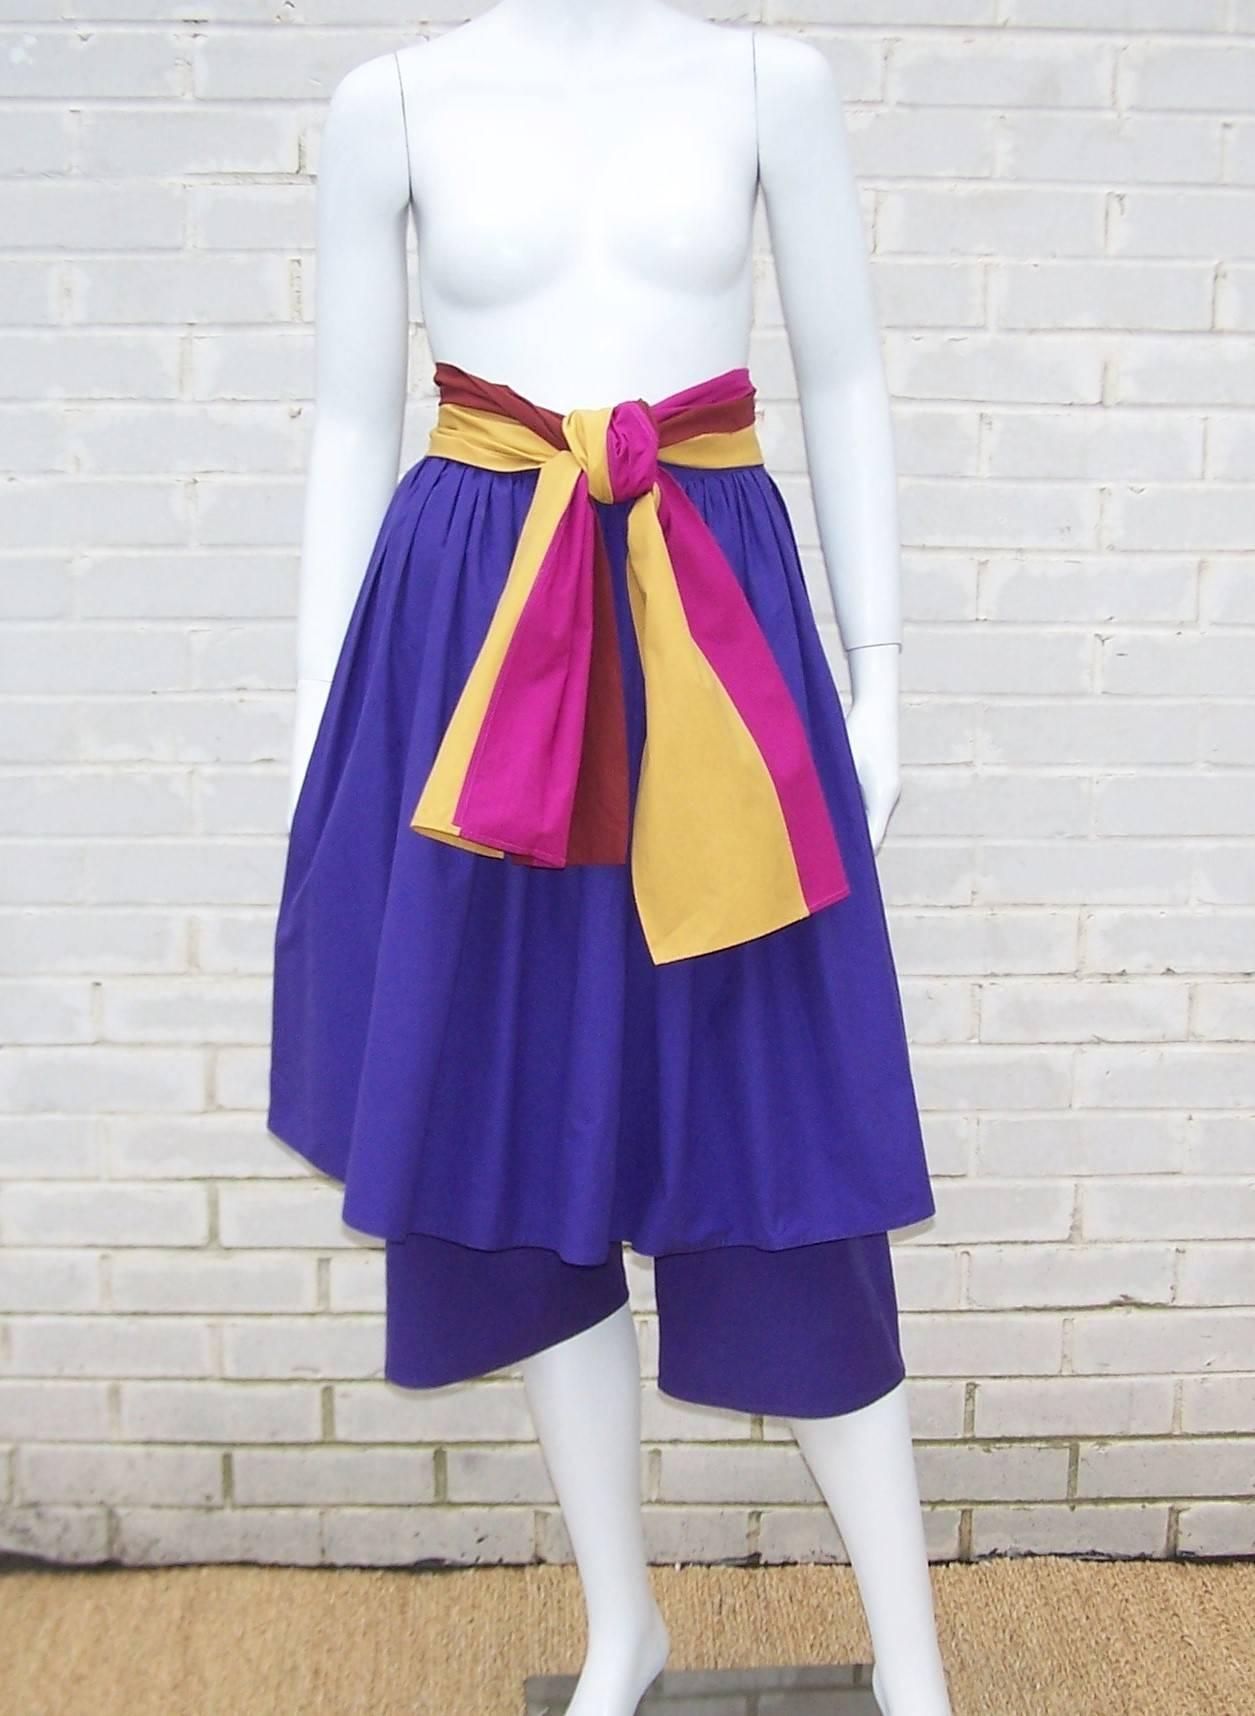 This crisp summery 1970's confection from Gucci combines colorful cotton with a unique silhouette to provide a fun design.  The contrasting color combination of royal purple with a built-in striped sash of goldenrod, fuchsia and burgundy is a